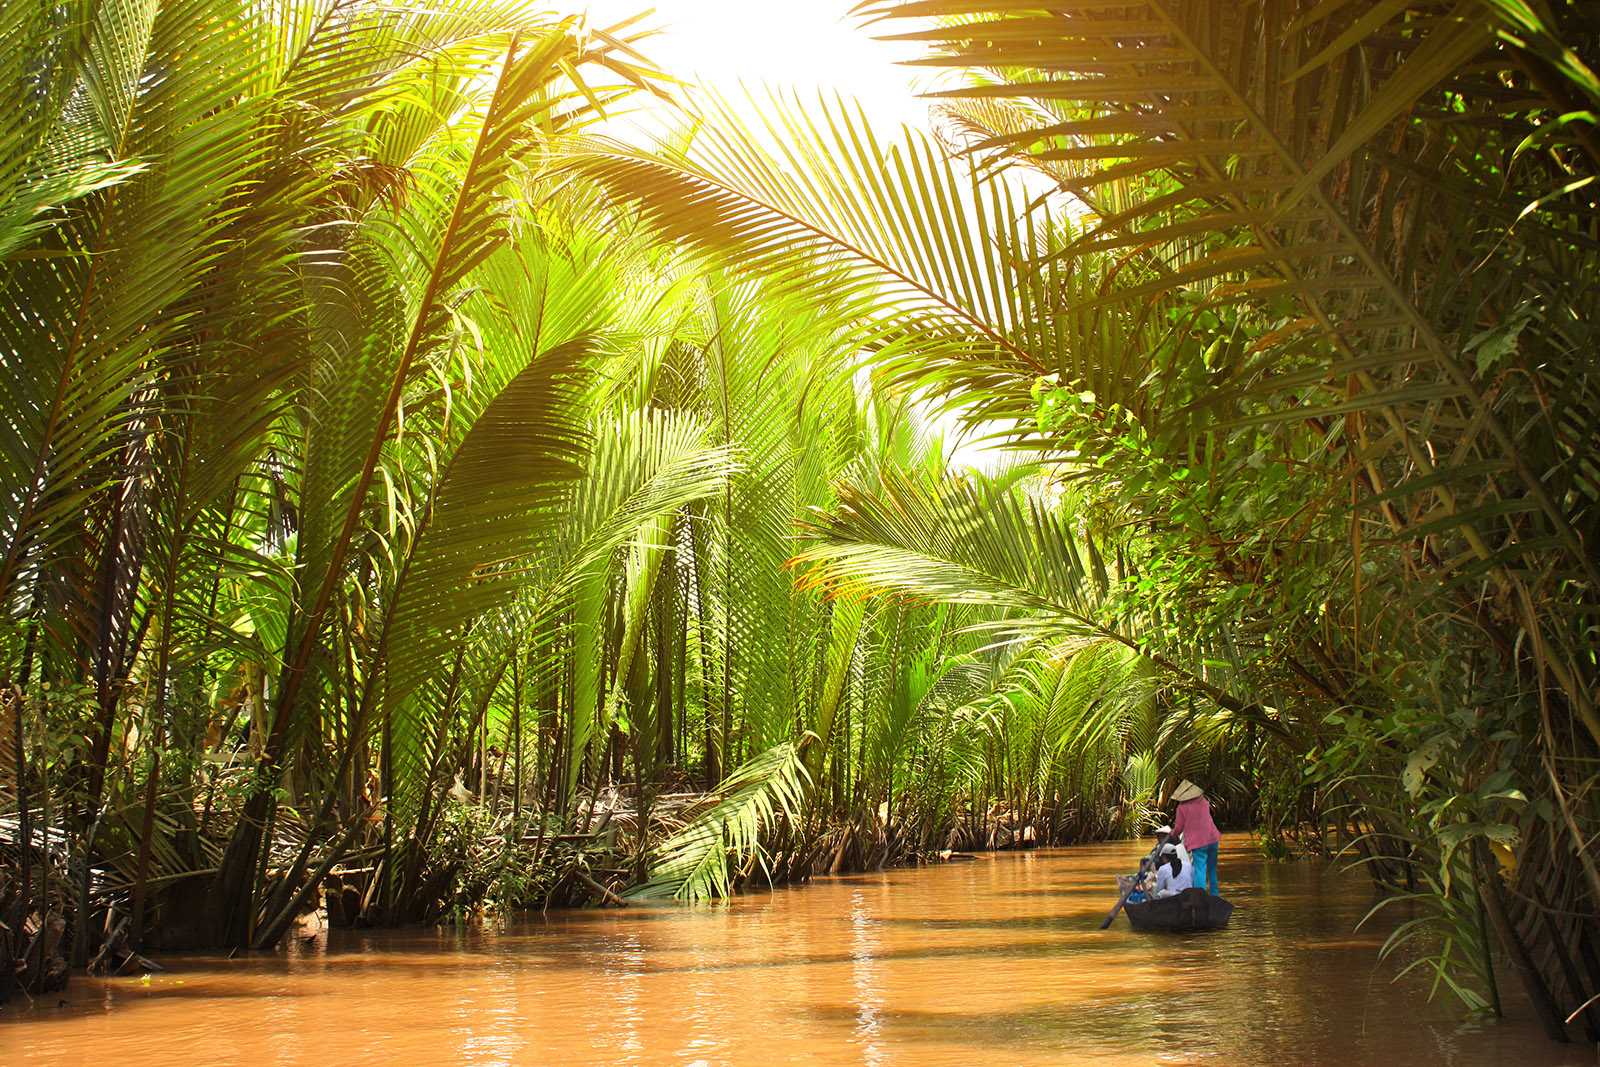 a person paddling a canoe on the mekong river in vietnam